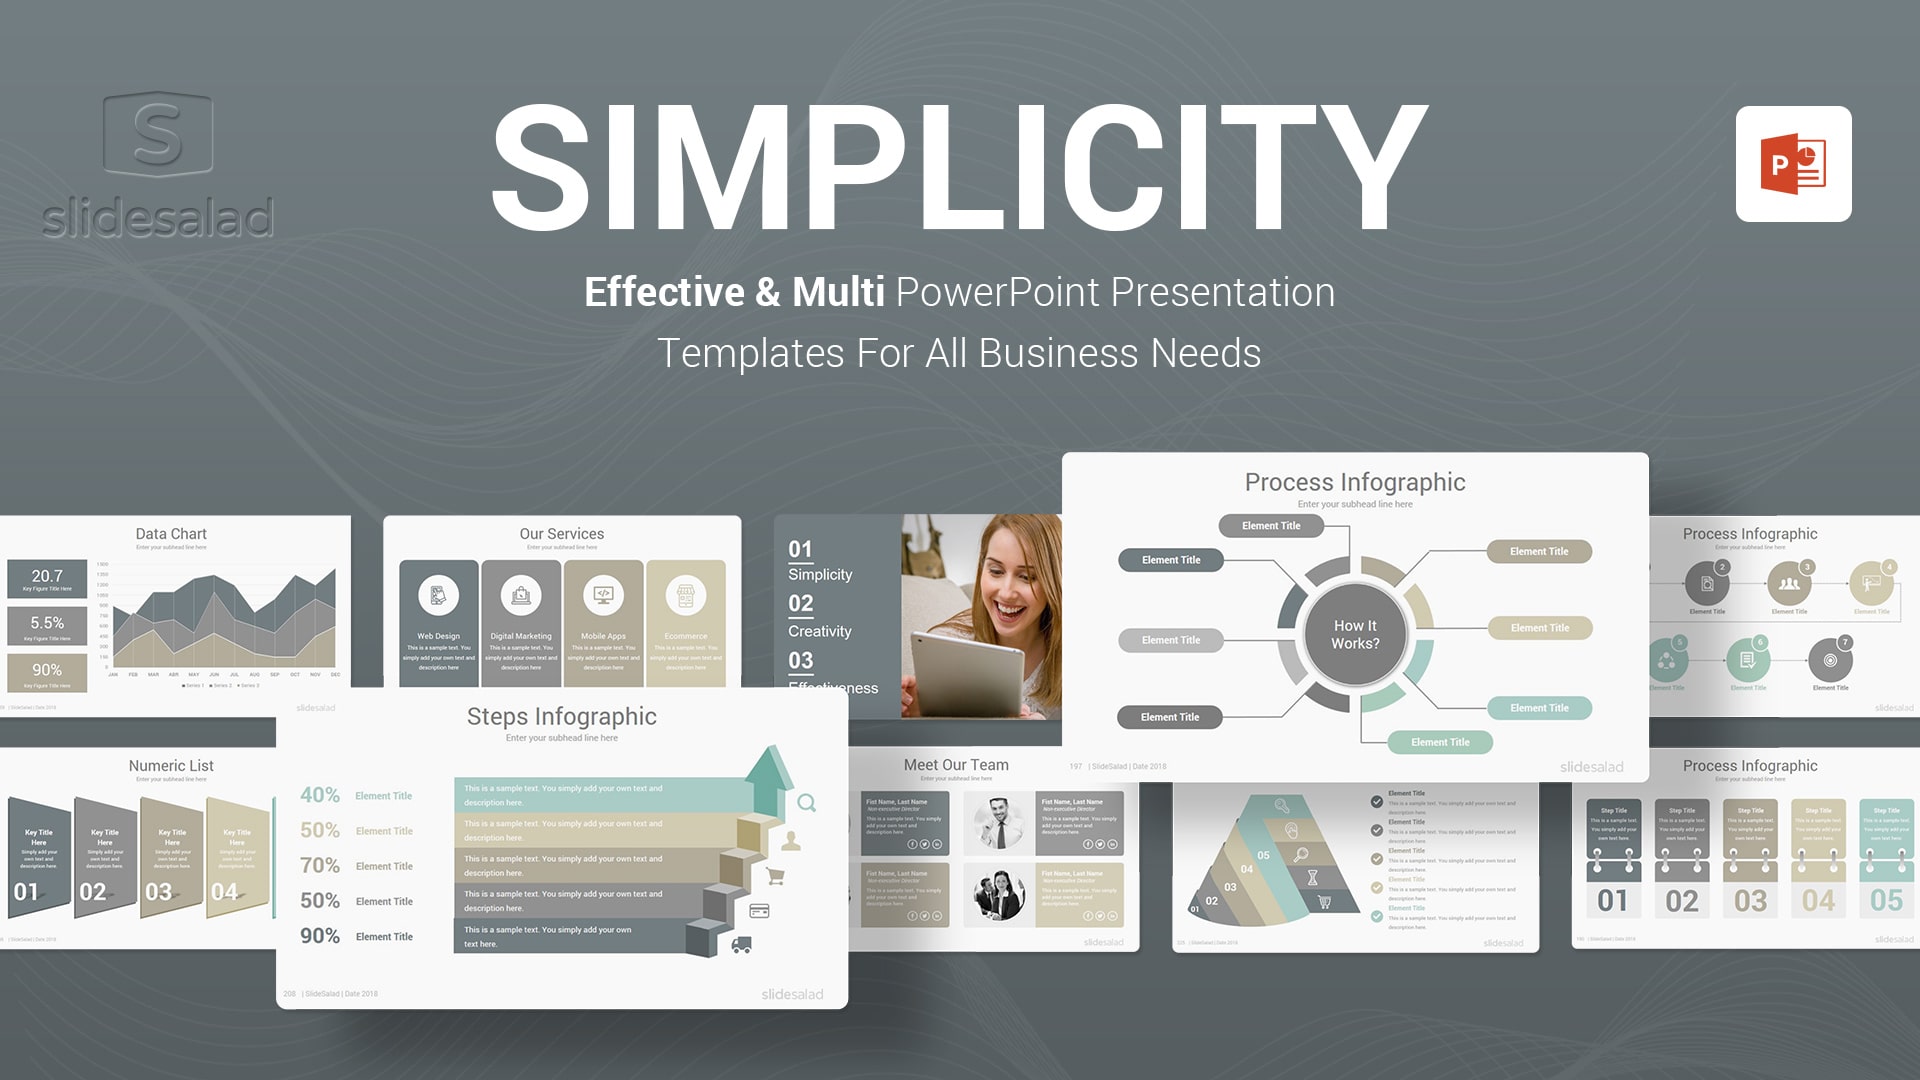 Simplicity Professional Business PowerPoint Templates - Great Webinar PowerPoint Templates